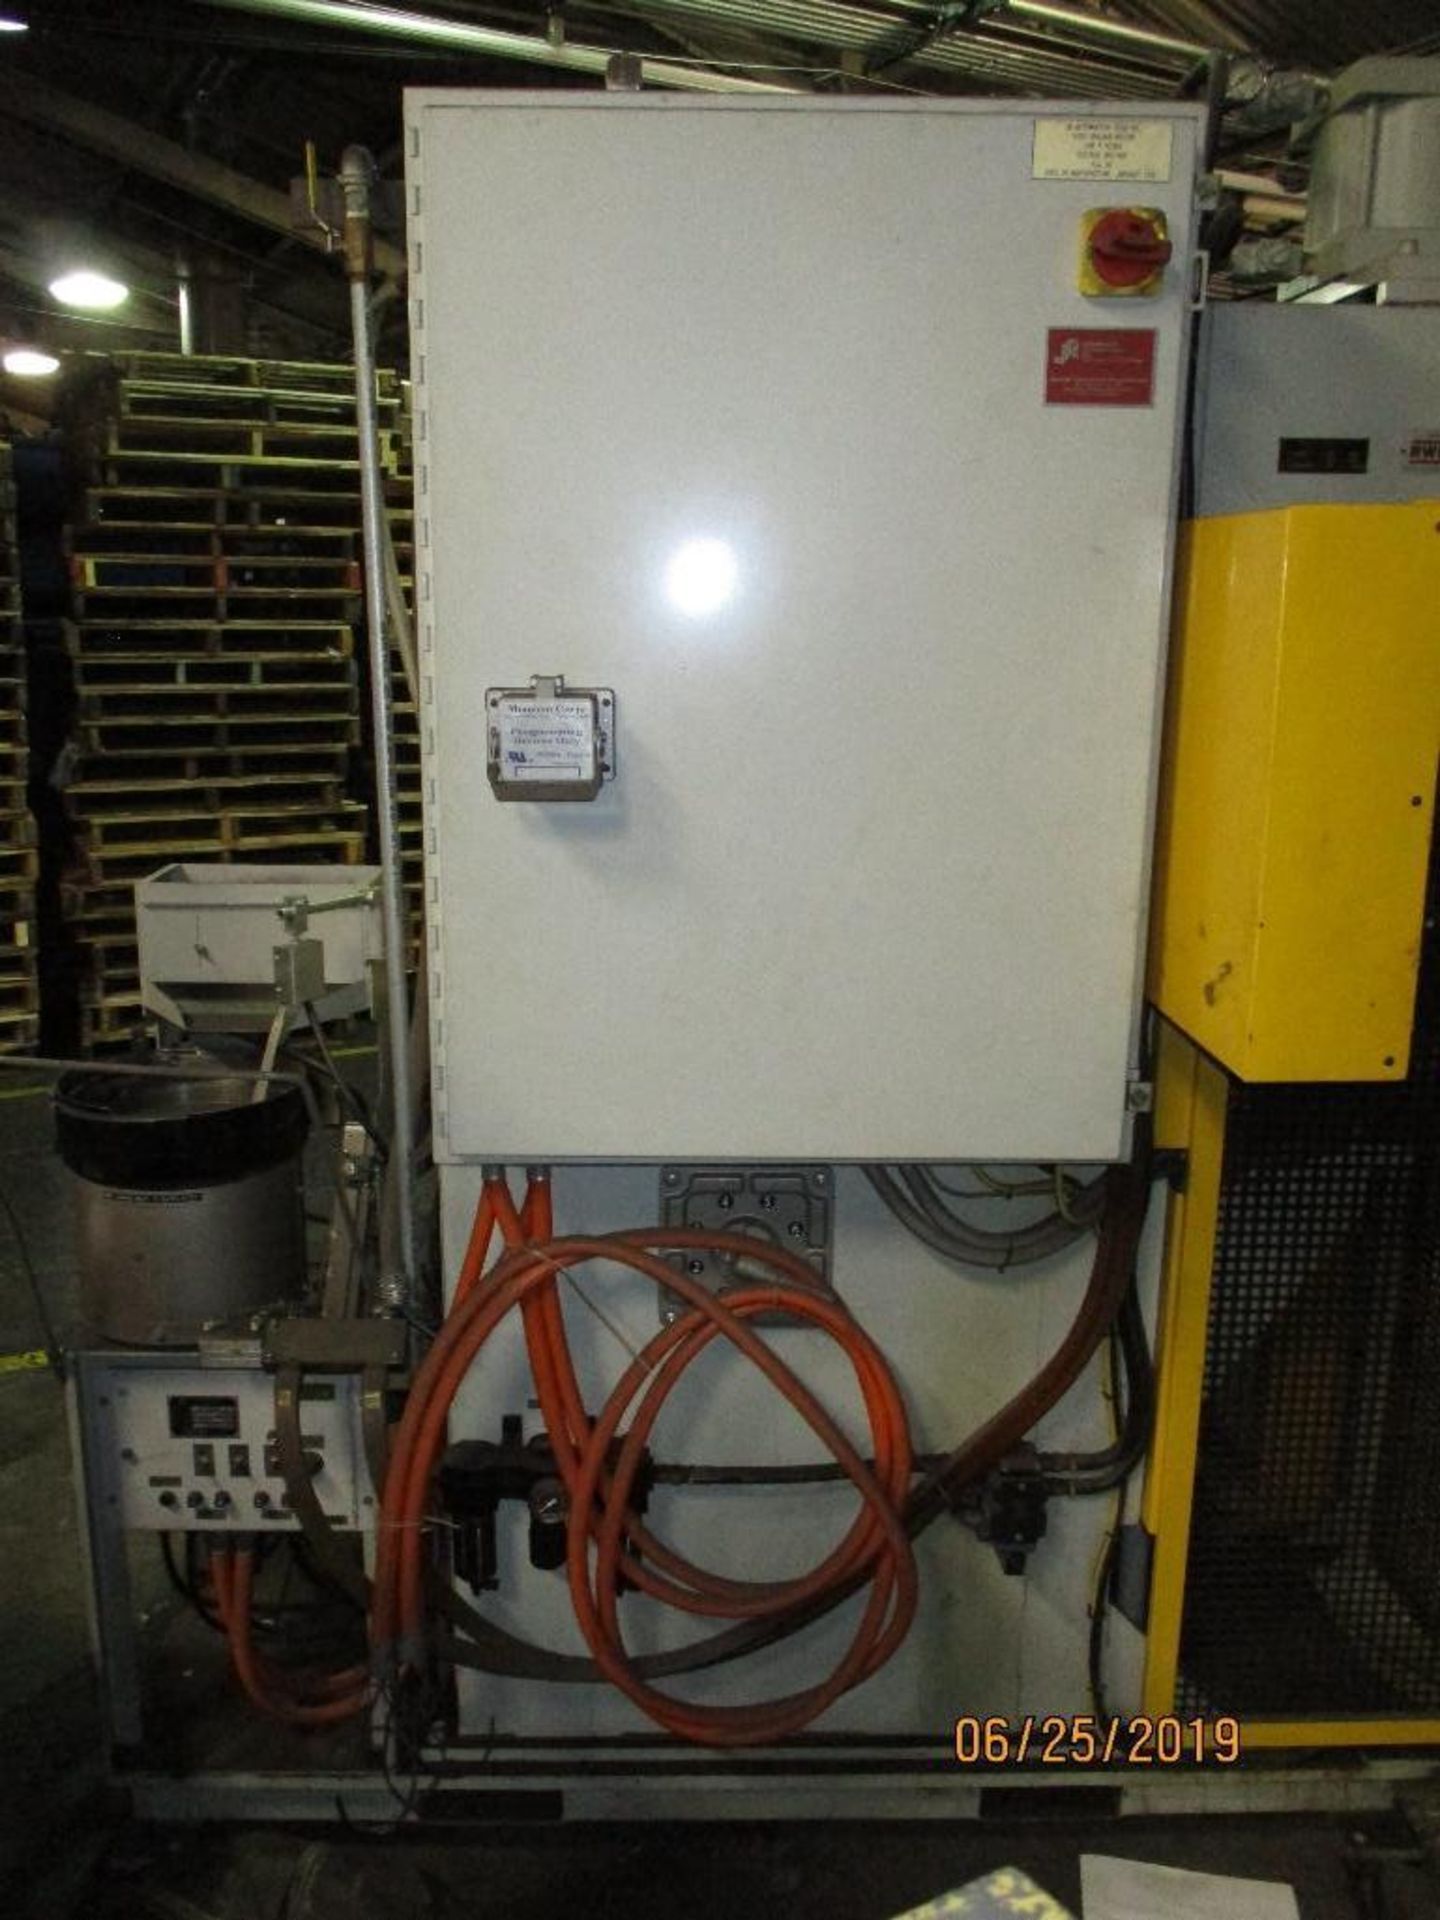 Banner Spot Welder M/N 2AP150A1 S/N 7340, Located at 800 West Broadway St. Three Rivers, MI. 49095 - Image 4 of 10